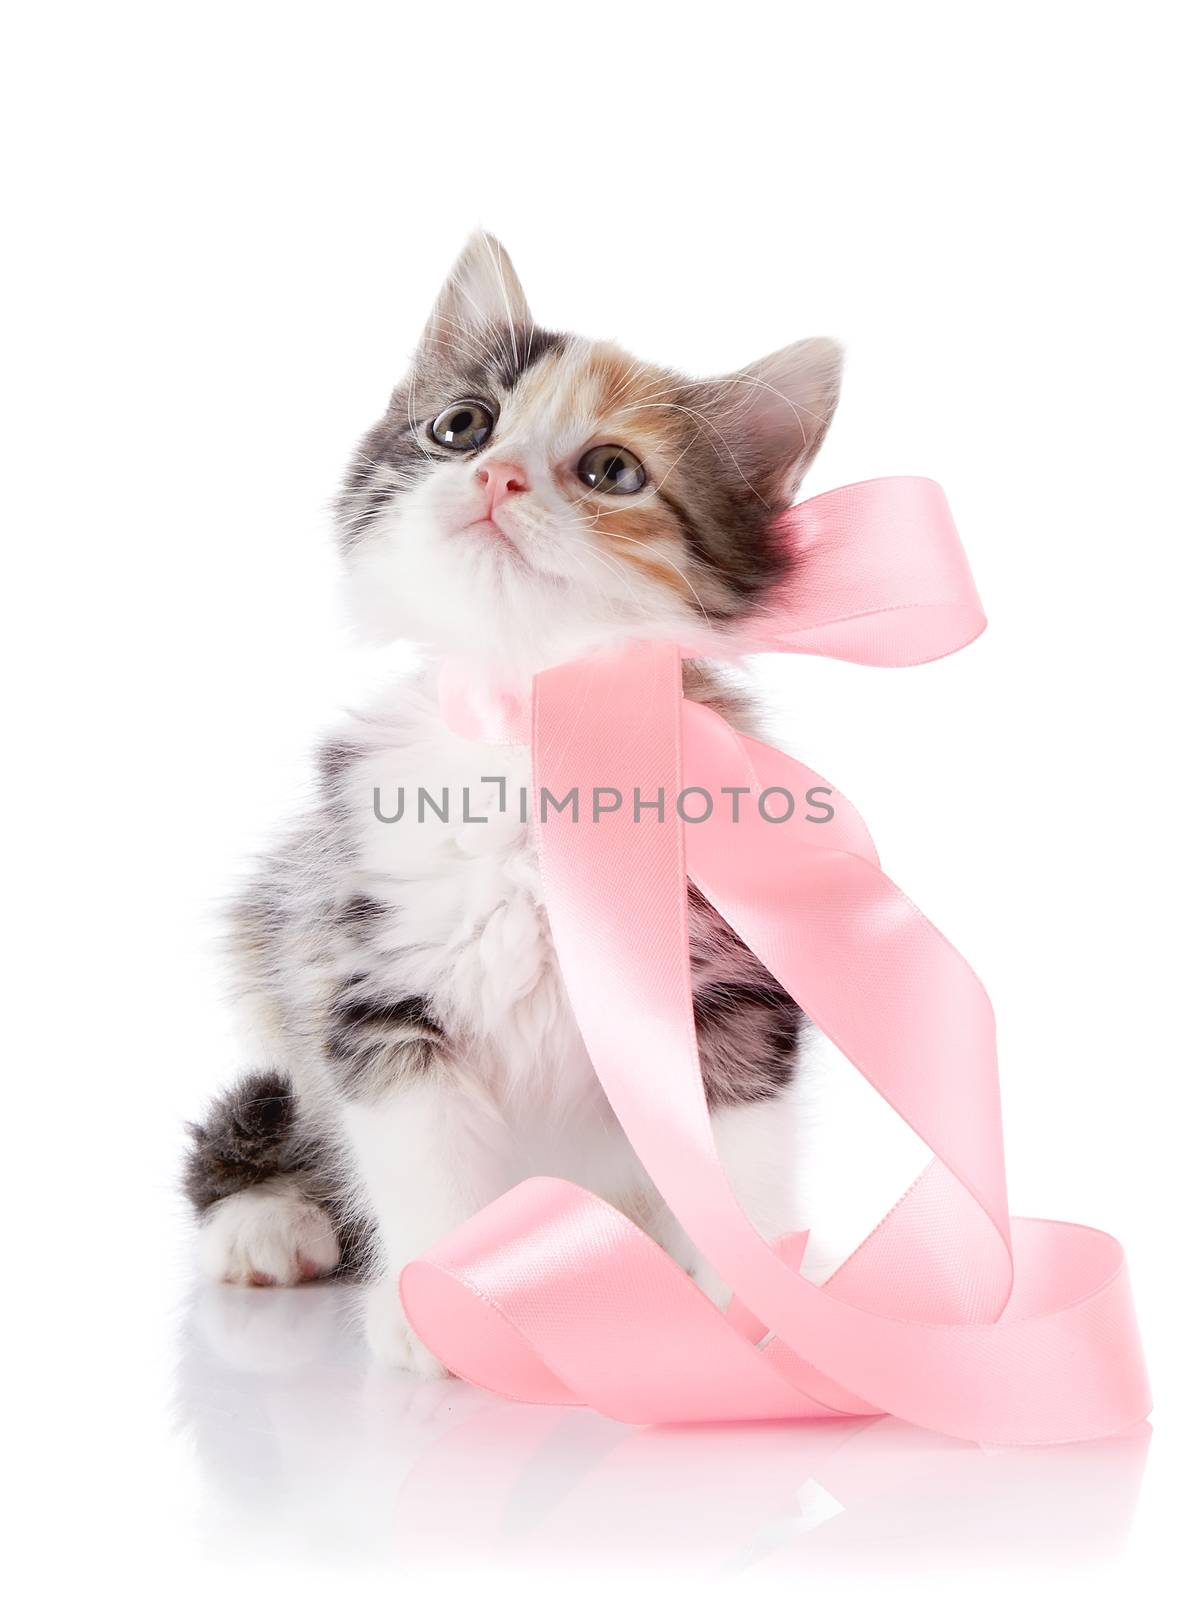 Kitten with a tape. Kitten with a bow. Multi-colored small kitten. Kitten on a white background. Small predator. Small cat.